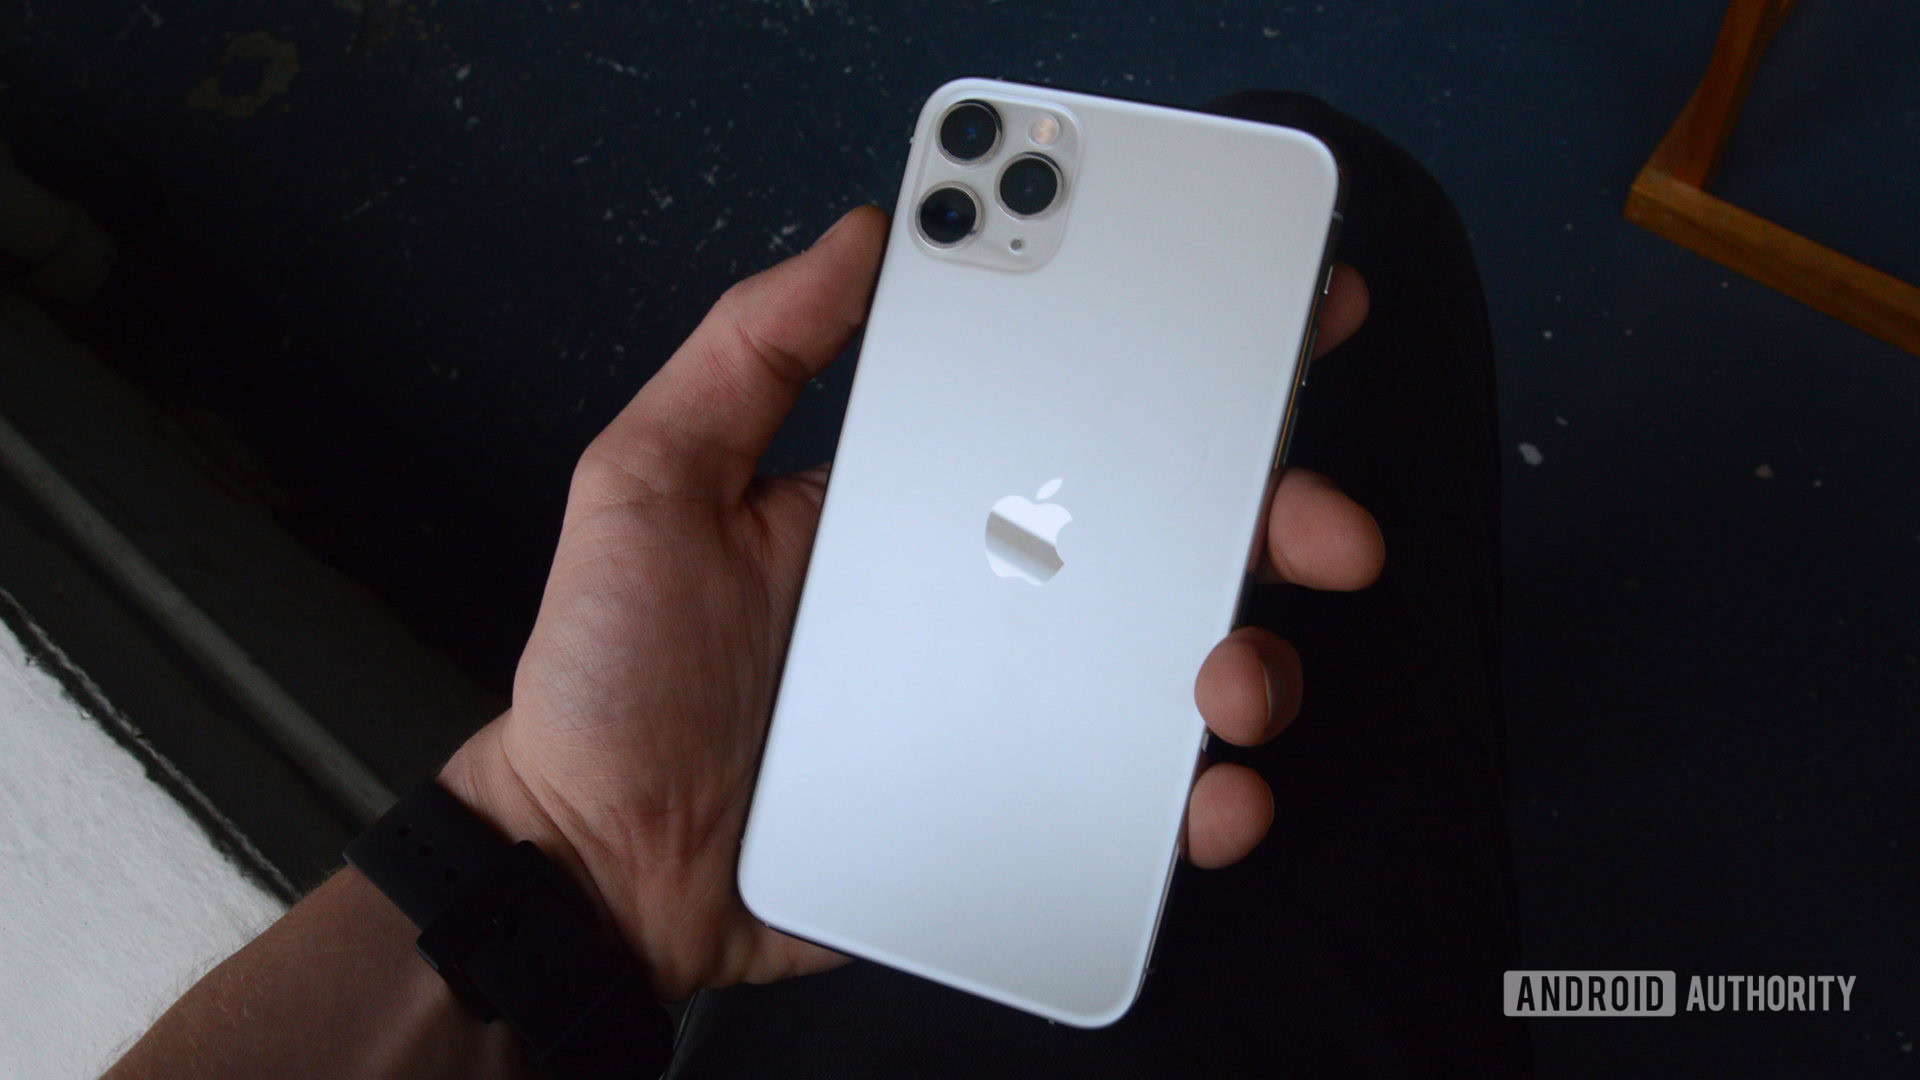 Apple iPhone 11 and 11 Pro: Hands-on Photos and First Impressions